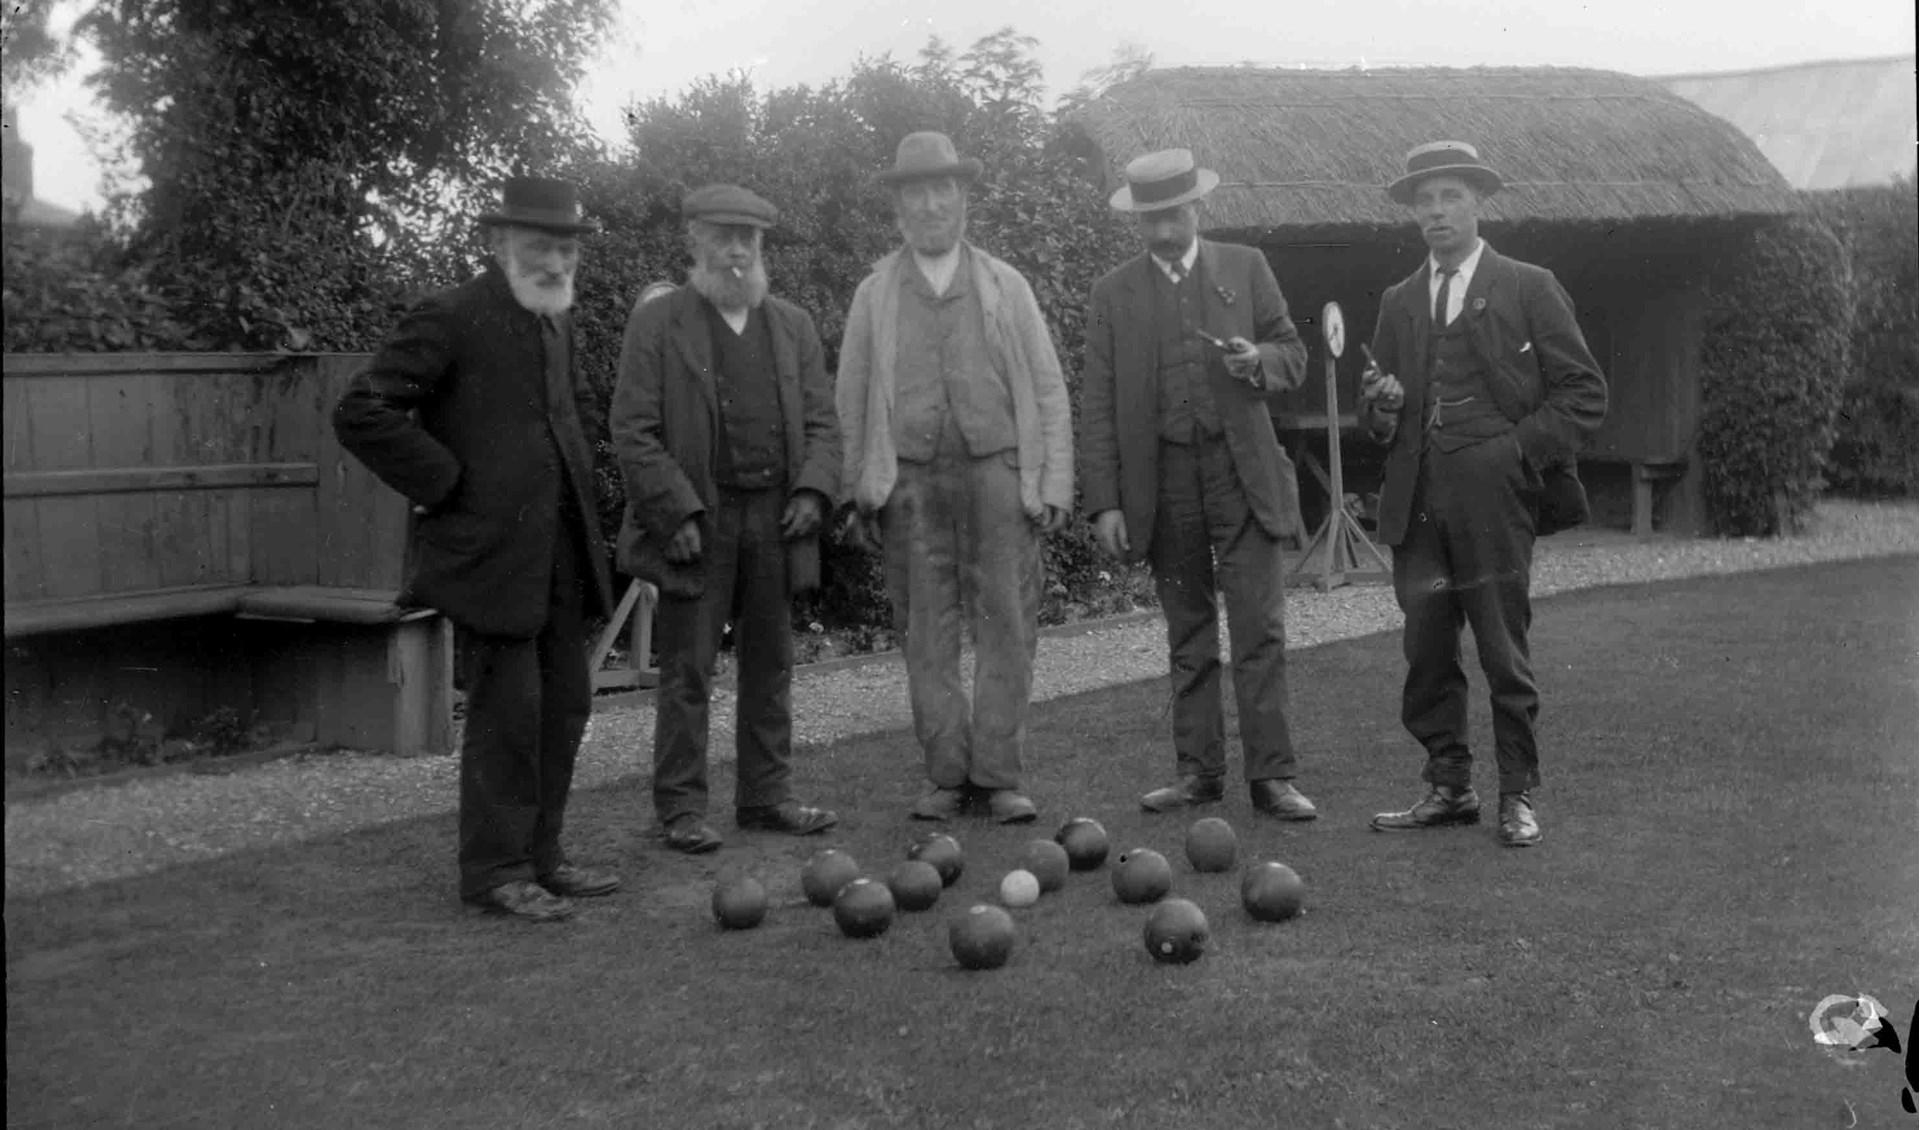 Club members enjoying a game on the bowling green around 1910